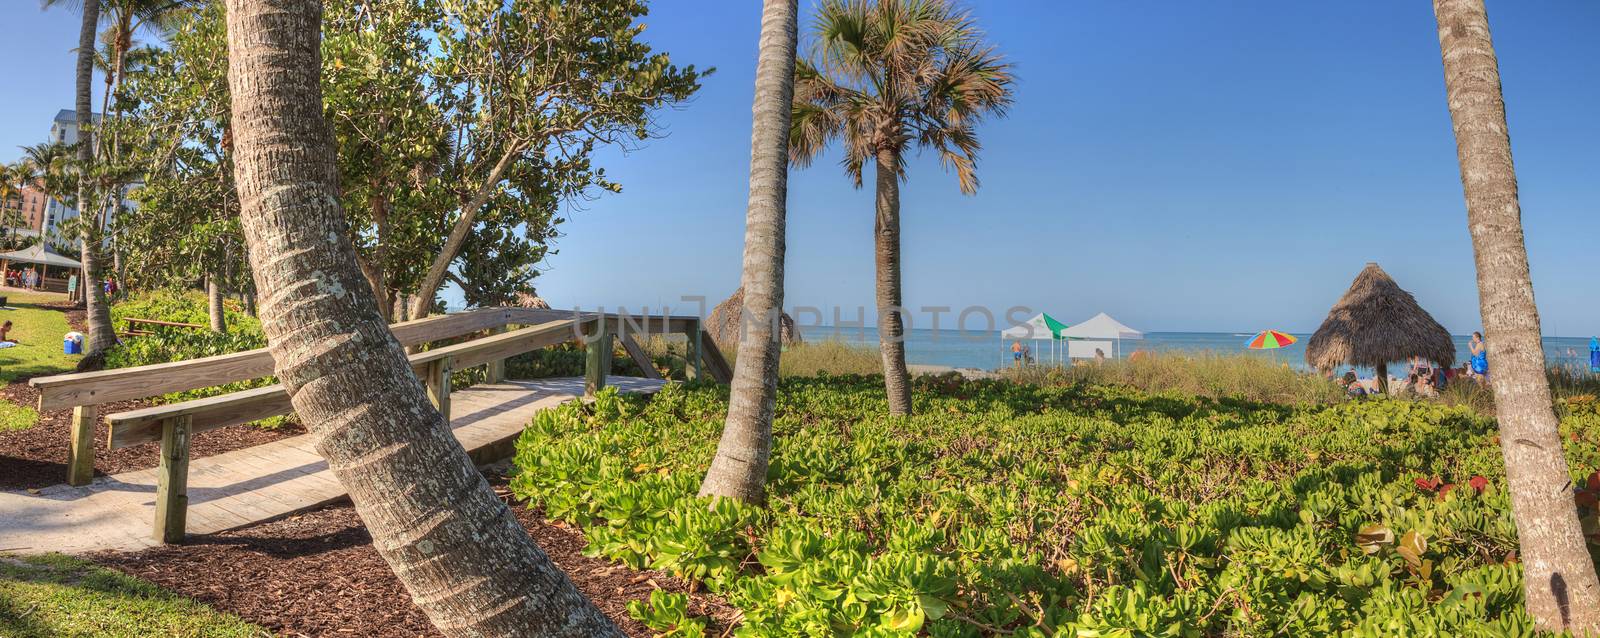 Clear blue sky over Lowdermilk Park in Naples, Florida